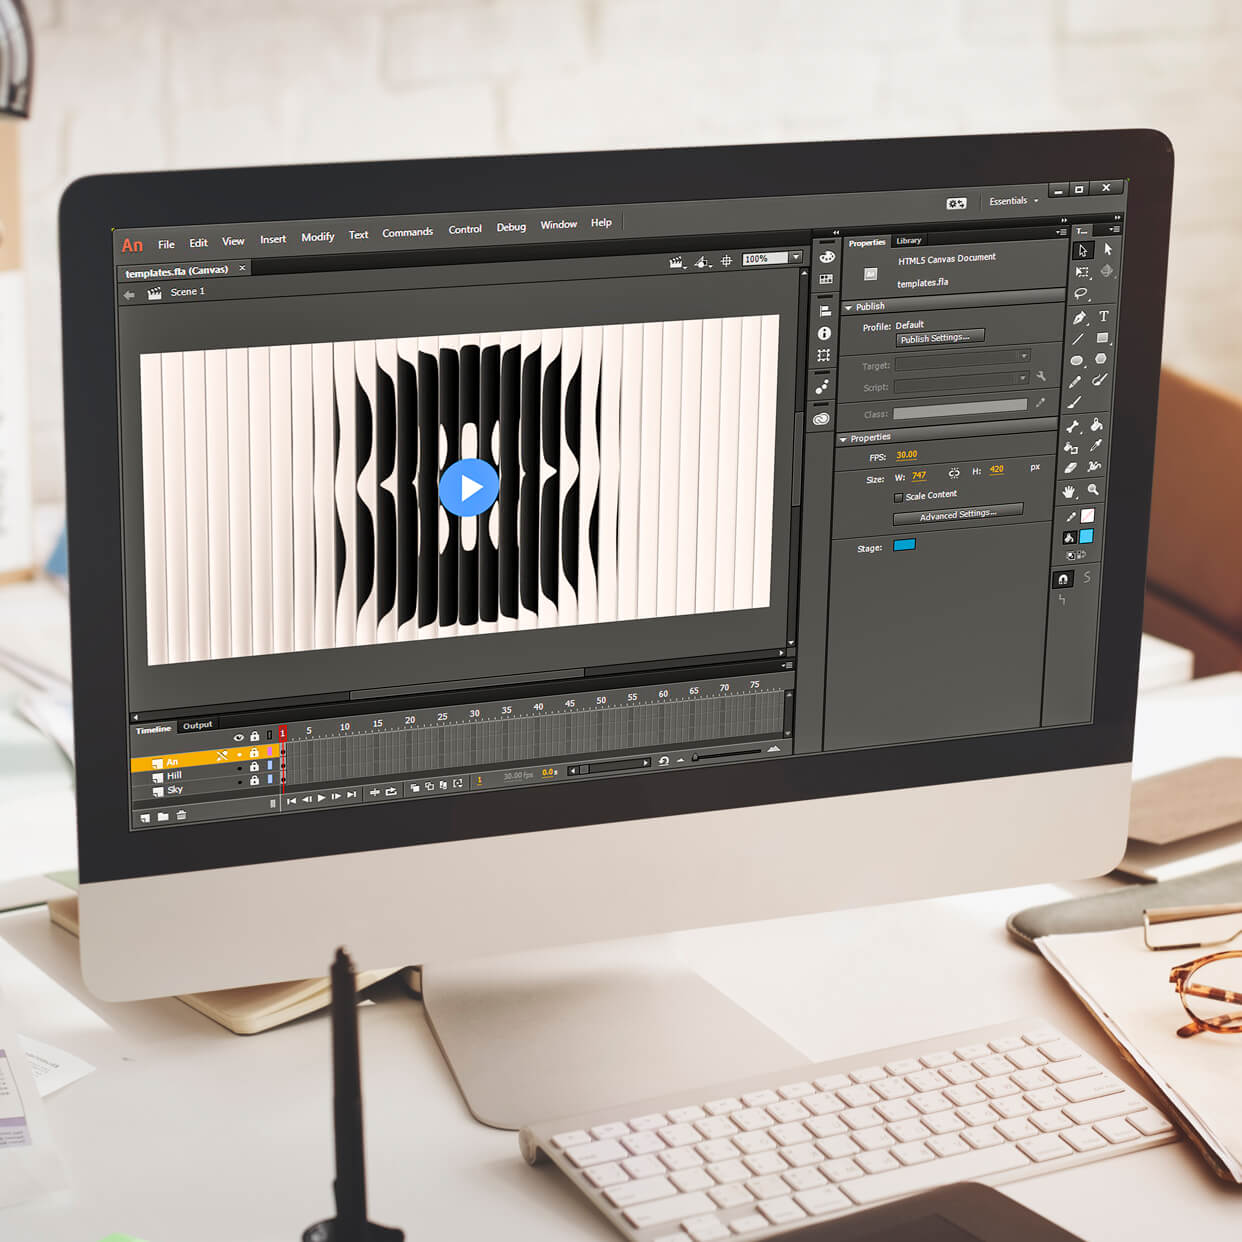 Adobe Animate Torrent – Where to Find Adobe Animate Torrent?